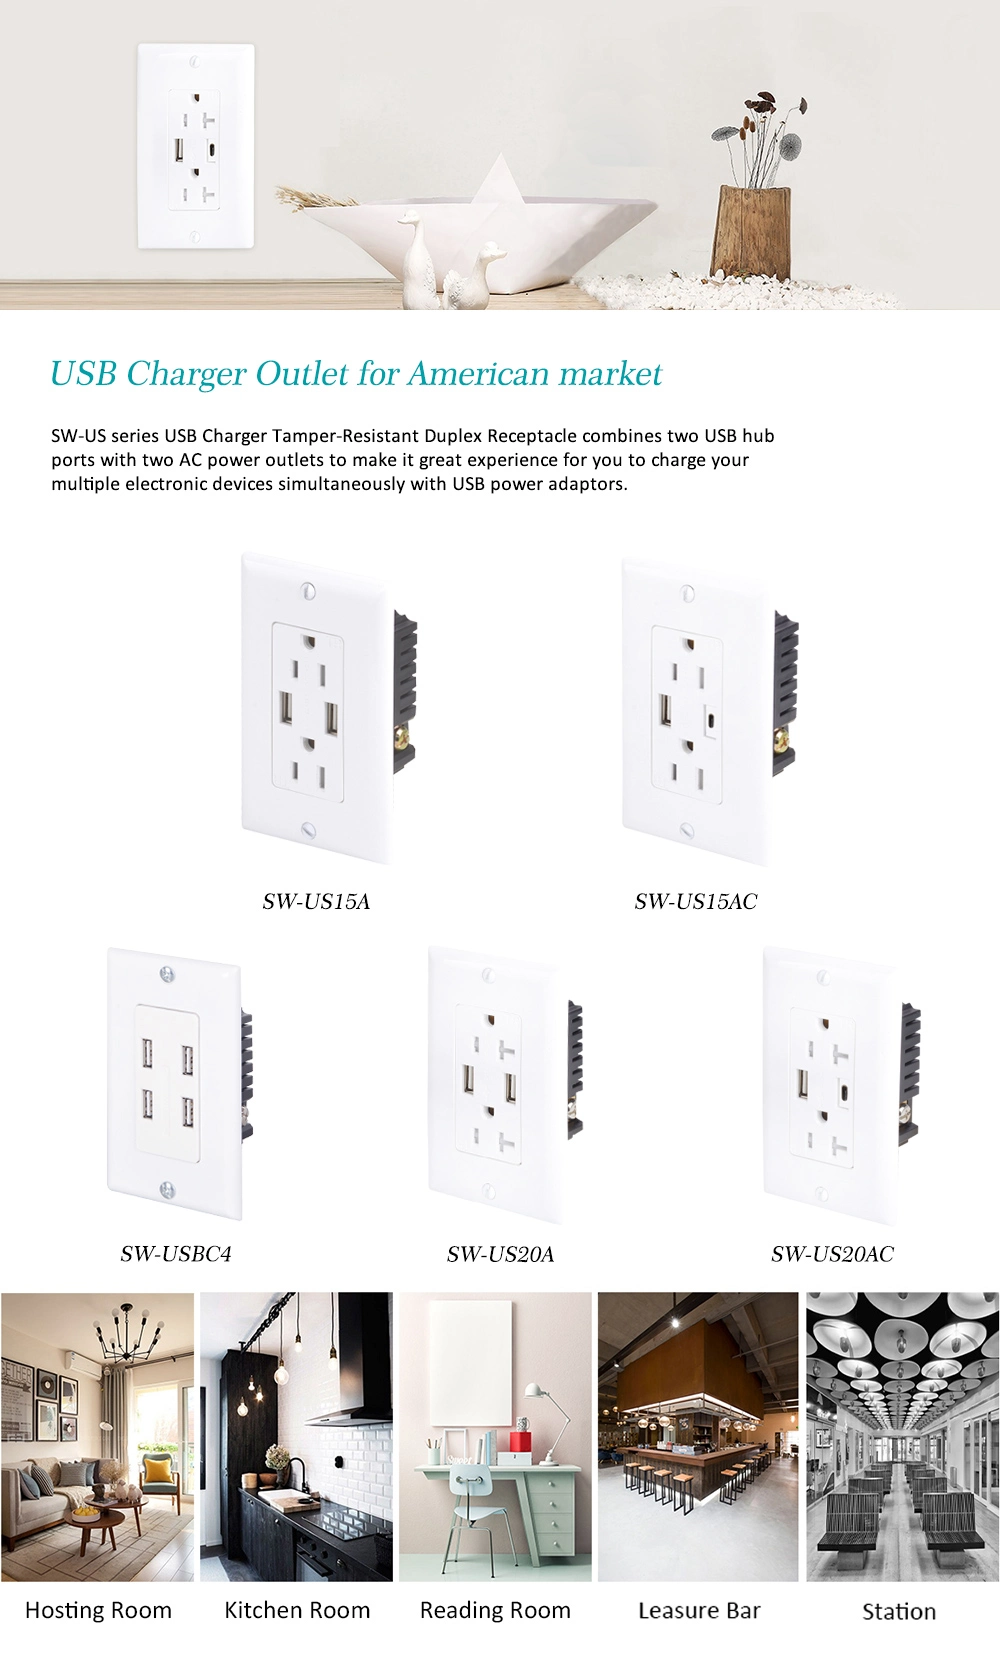 USB Charger Wall Outlet Dual High Speed Duplex Receptacle 15-AMP, Smart 4A Quick Charging Capability, Tamper Resistant Outlet USB with Wall Plate